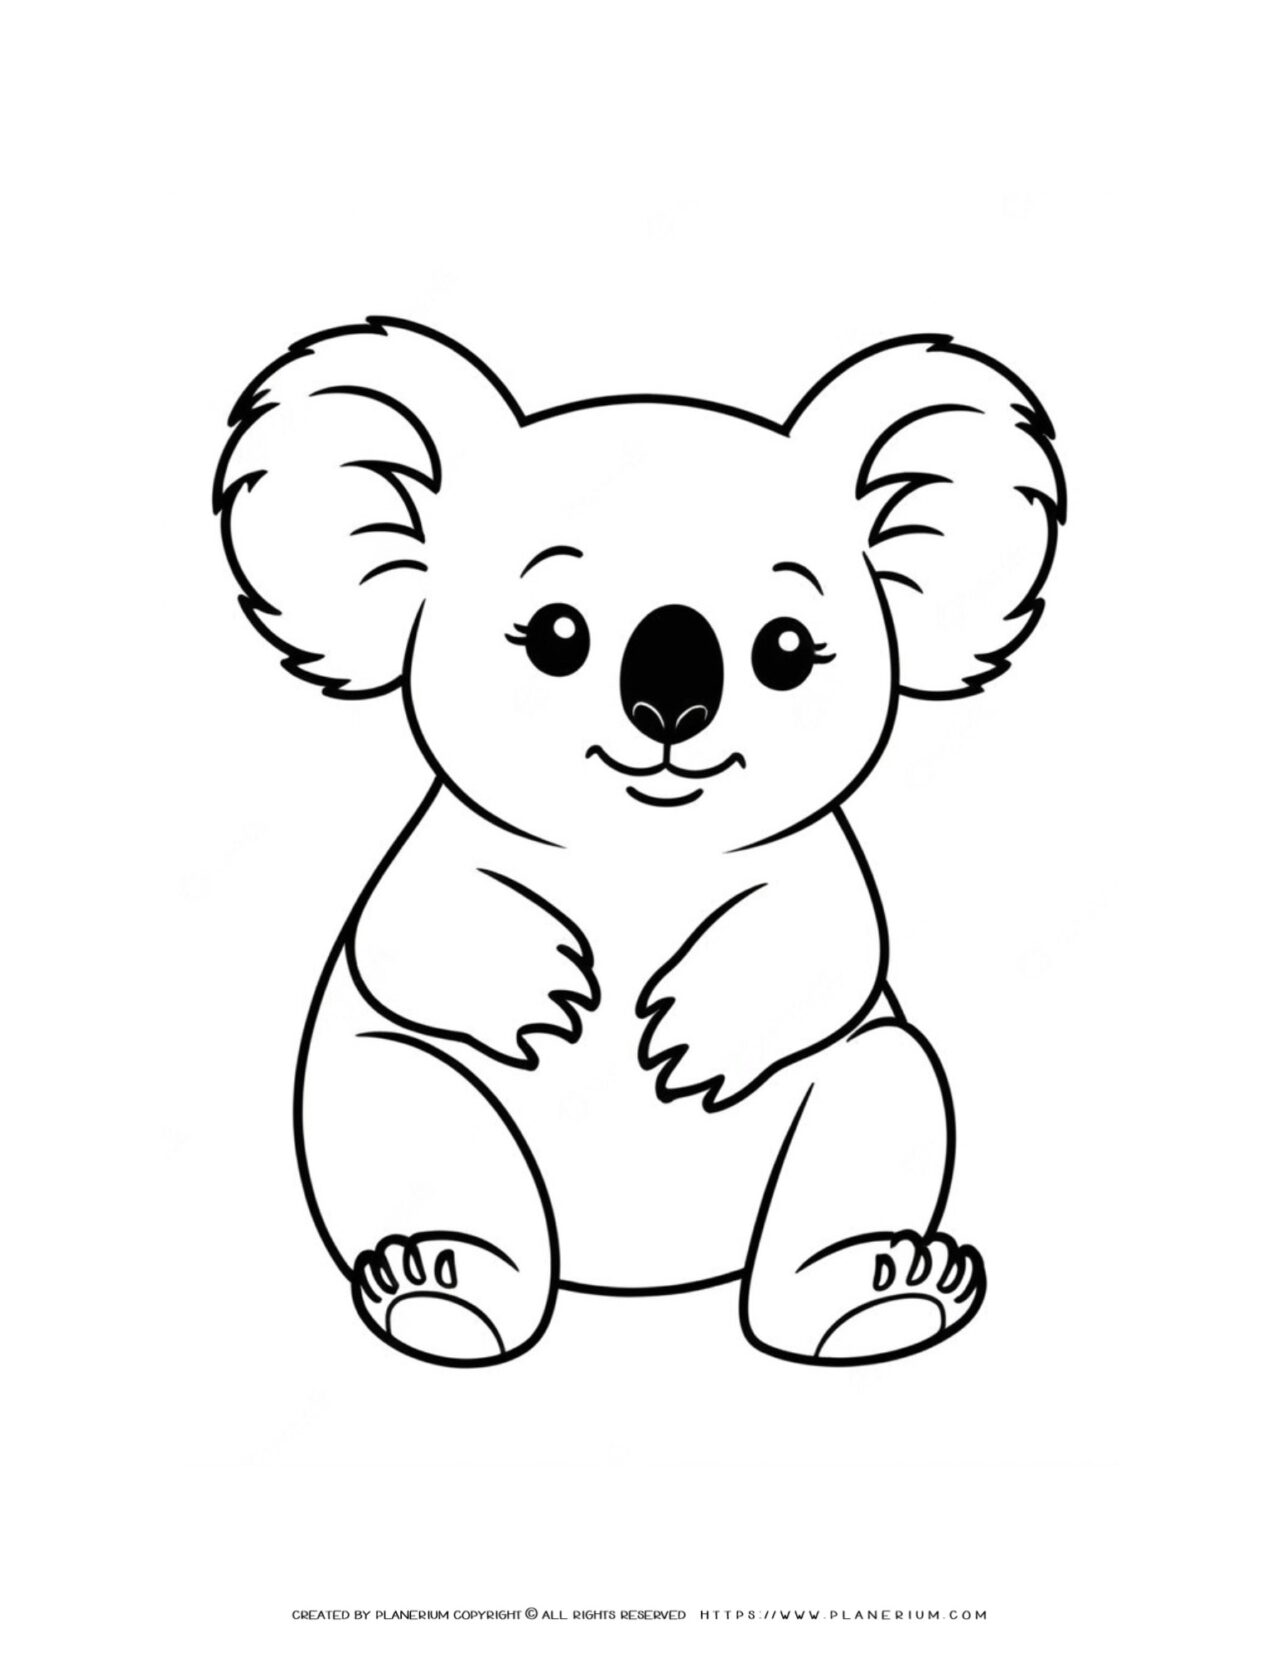 cute-koala-outline-coloring-page-for-kids